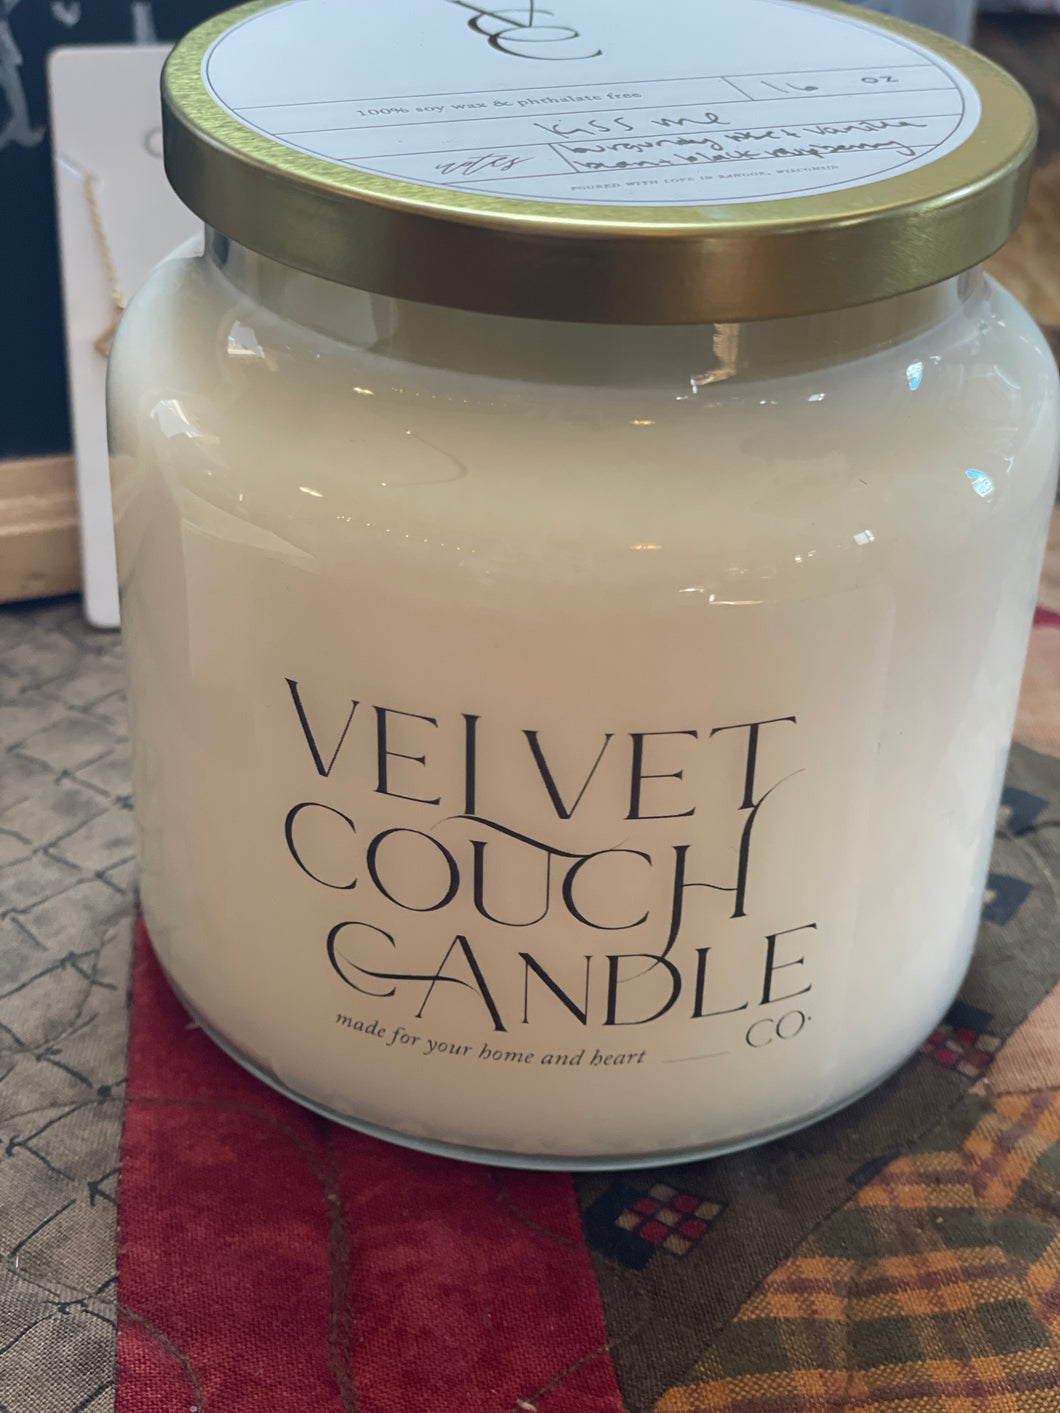 M- February Monthly candle( Kiss Me ) Velvet Couch Candle Co.